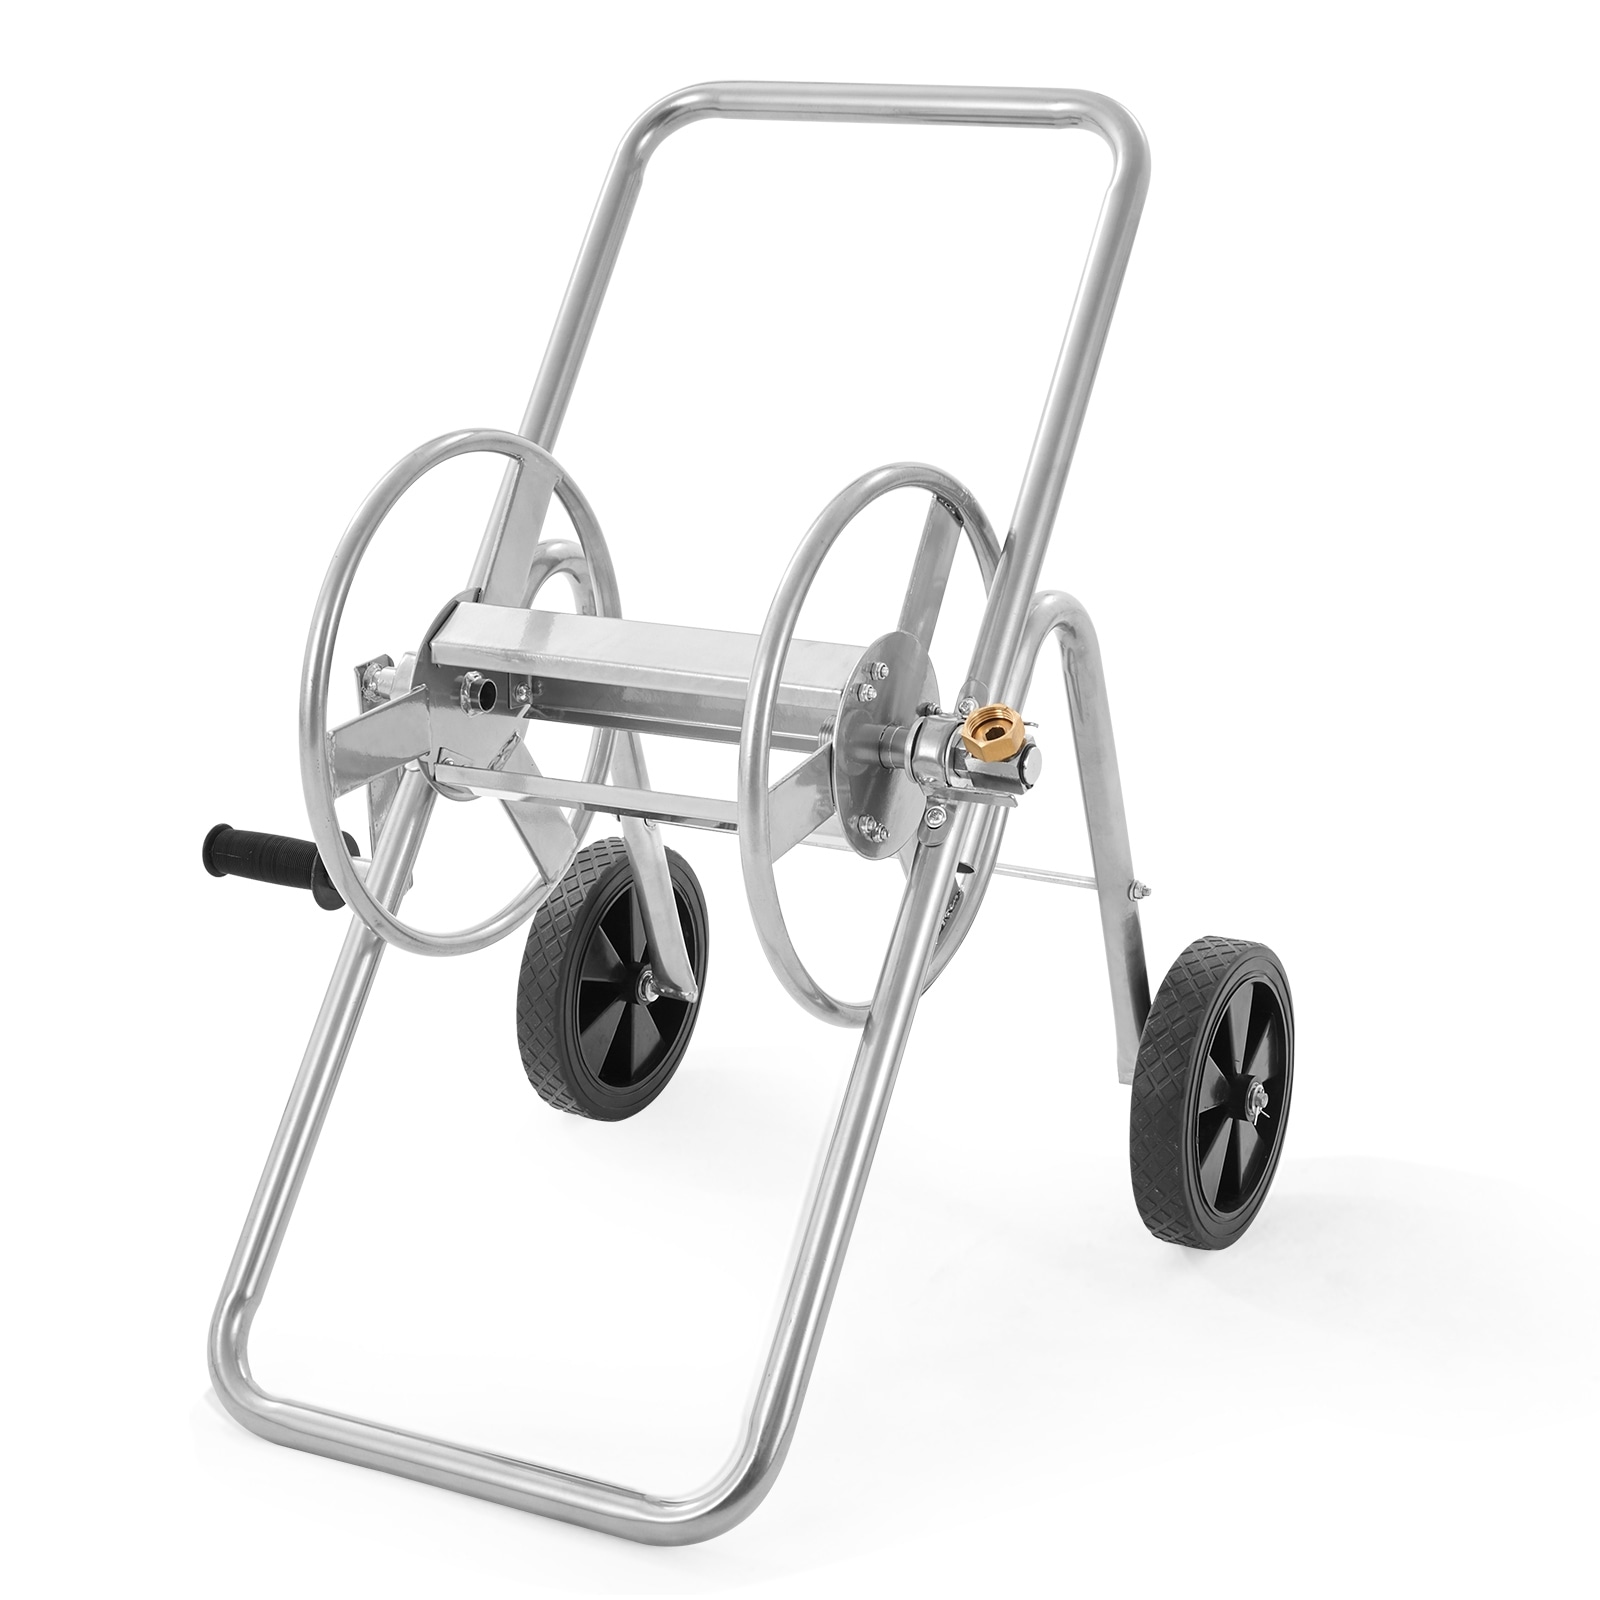 Steel Hose Reel Cart China Trade,Buy China Direct From Steel Hose Reel Cart  Factories at